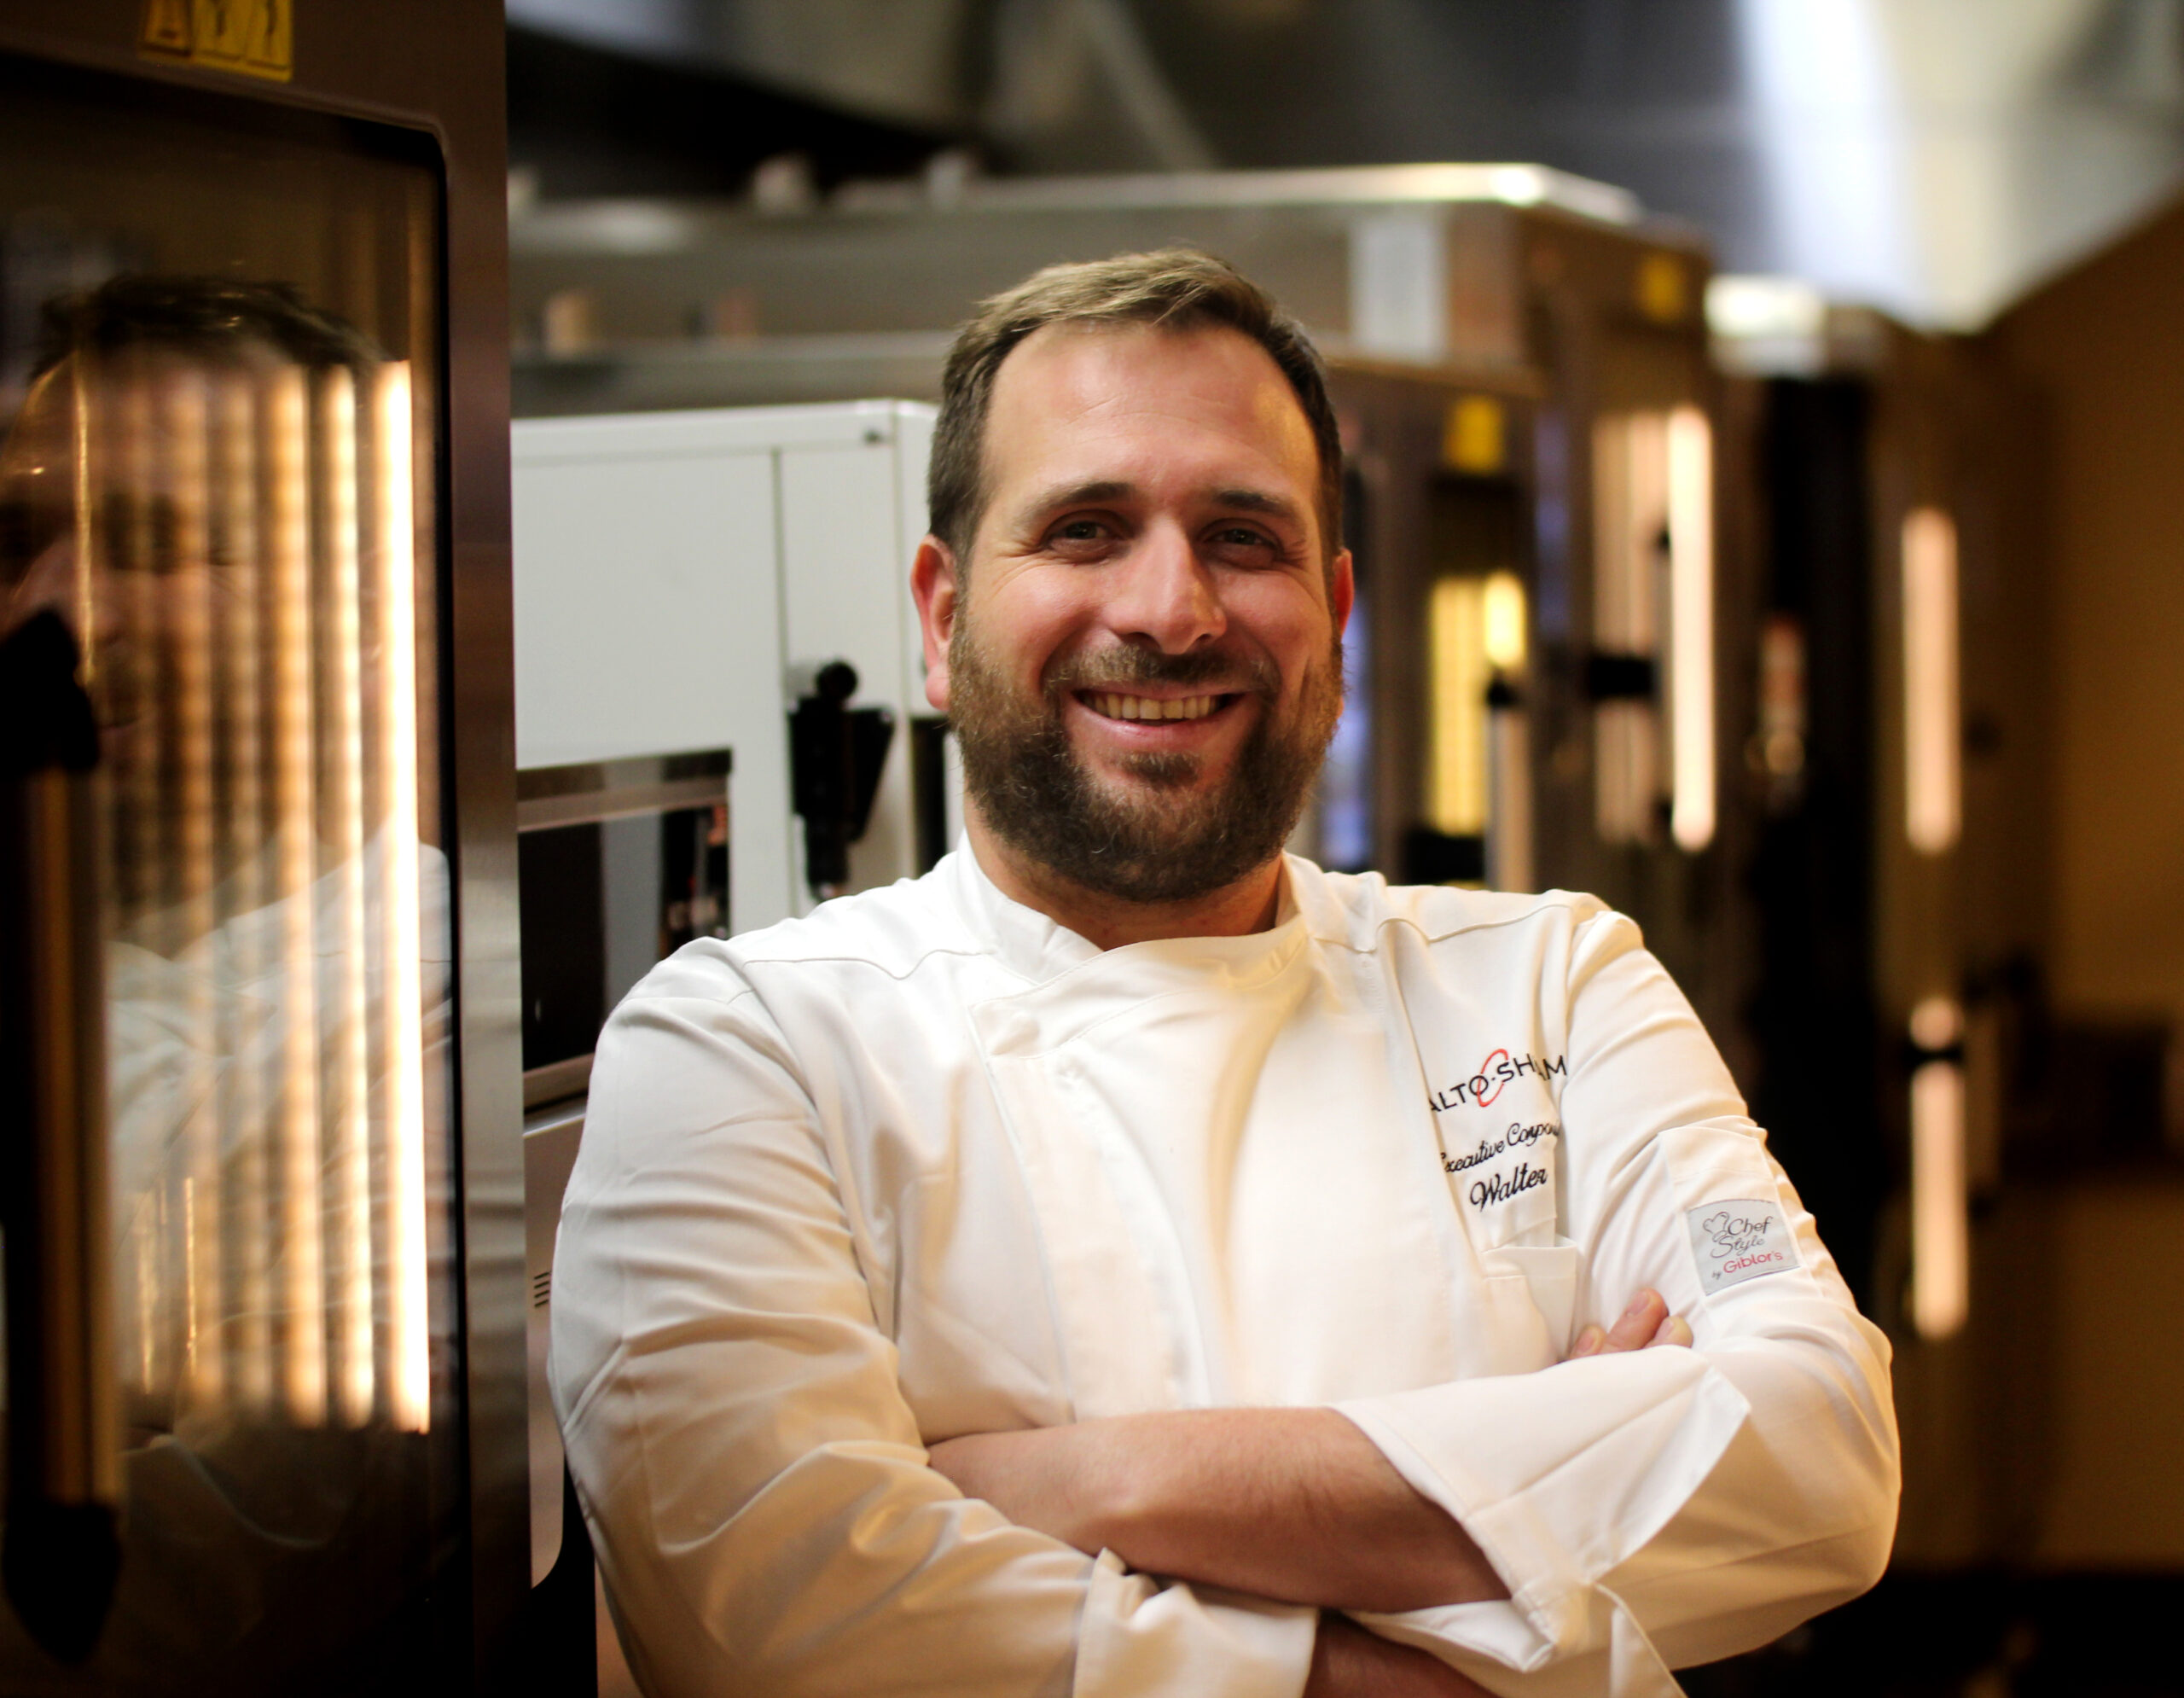 Alto-Shaam Appoints New Corporate Executive Chef for Europe, the Middle East and Africa (EMEA)